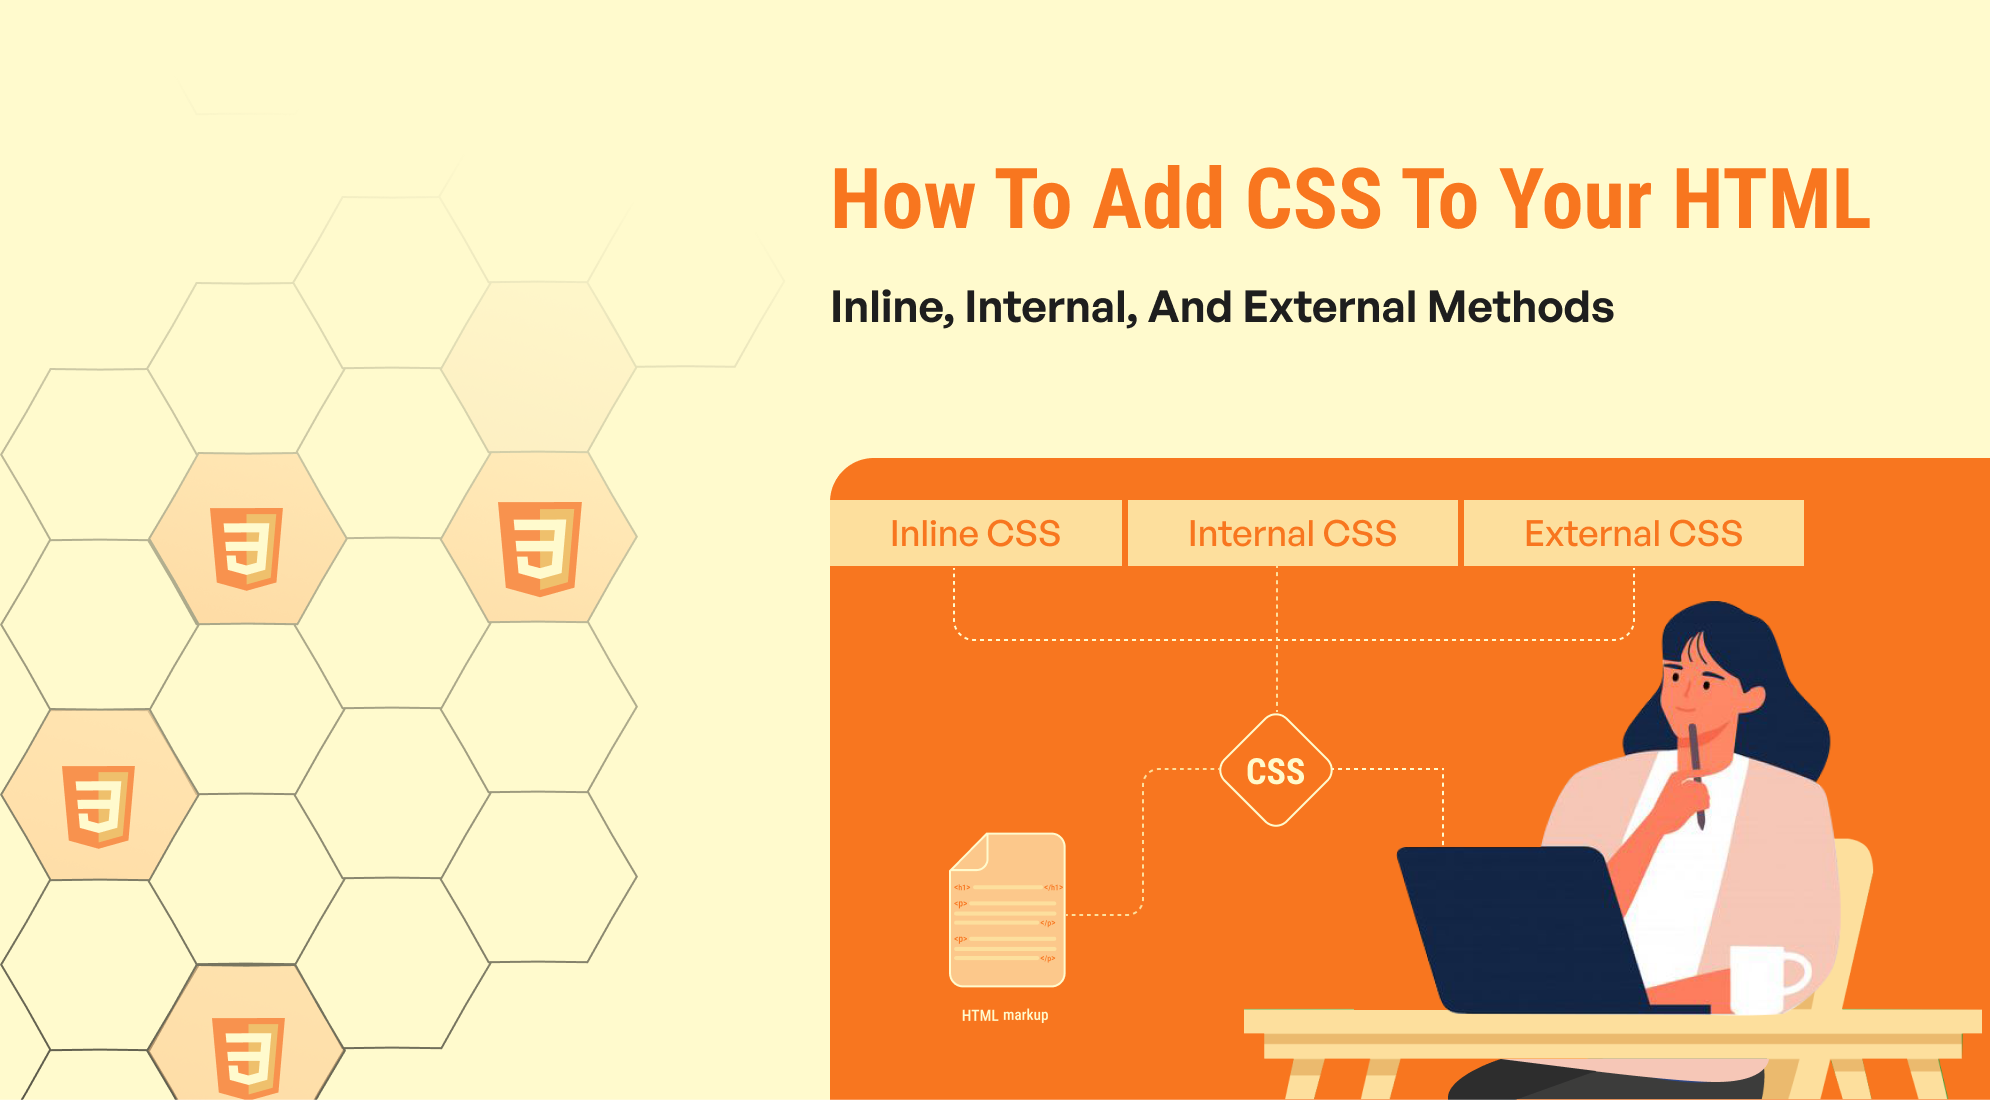 How to Add CSS to Your HTML: Inline, Internal, and External Methods